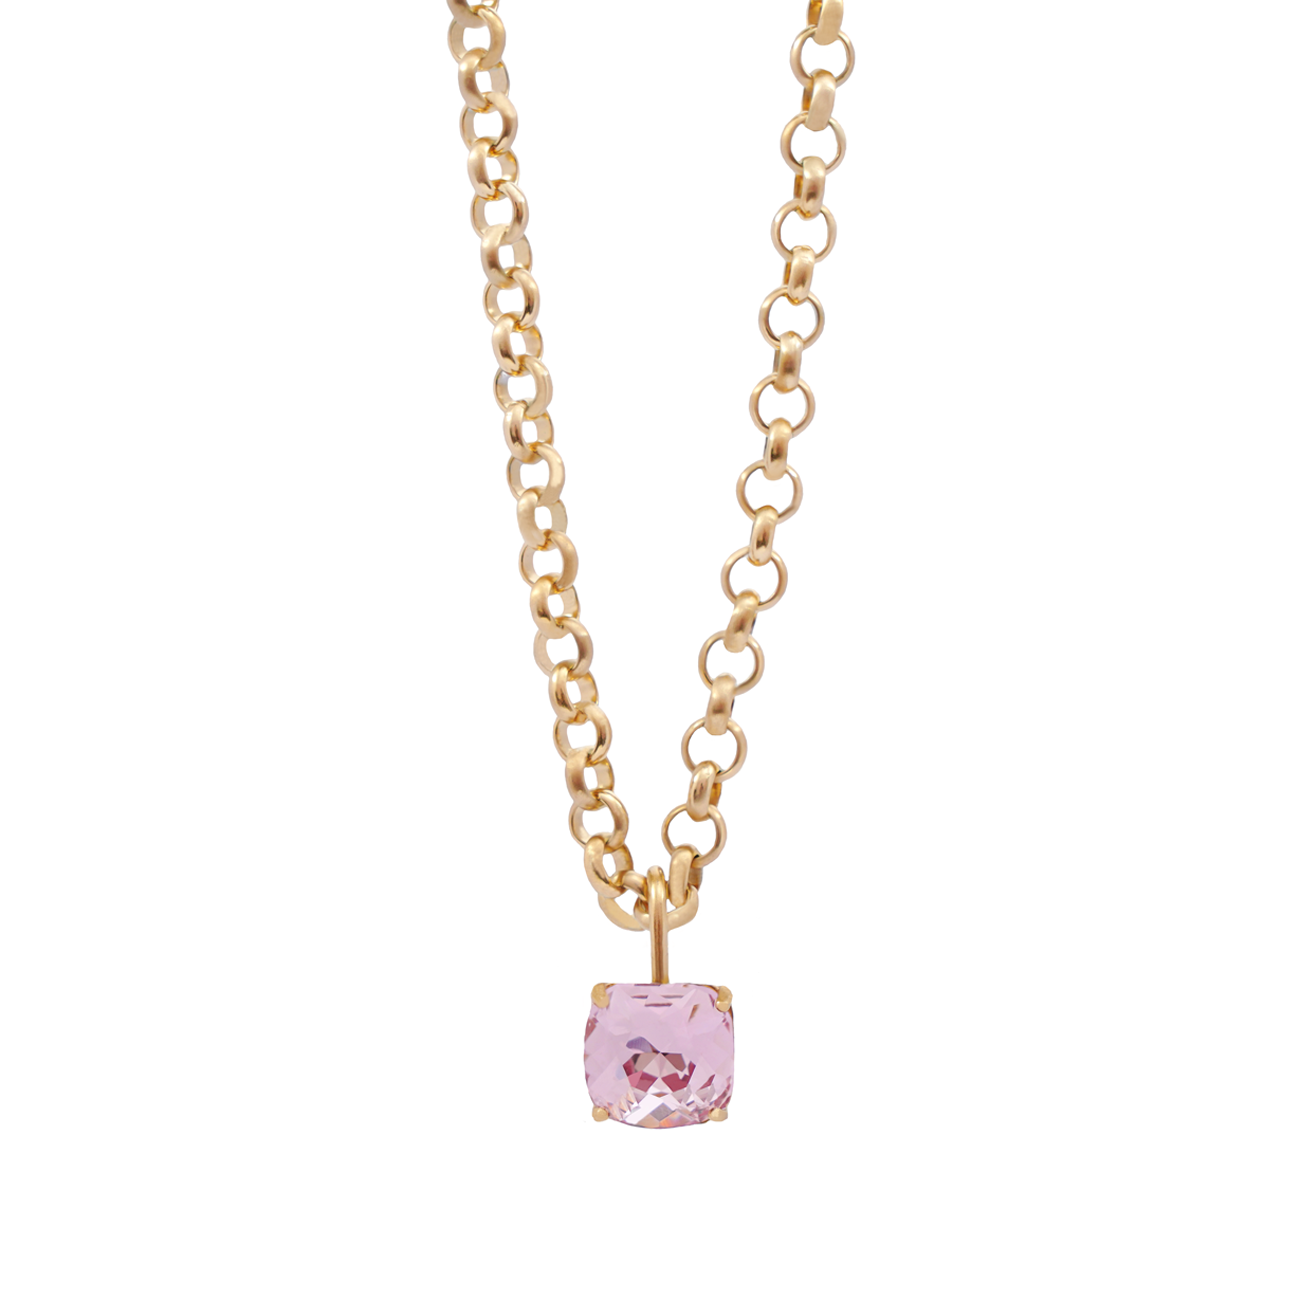 Carla Crystal chain necklace - Pink favourite